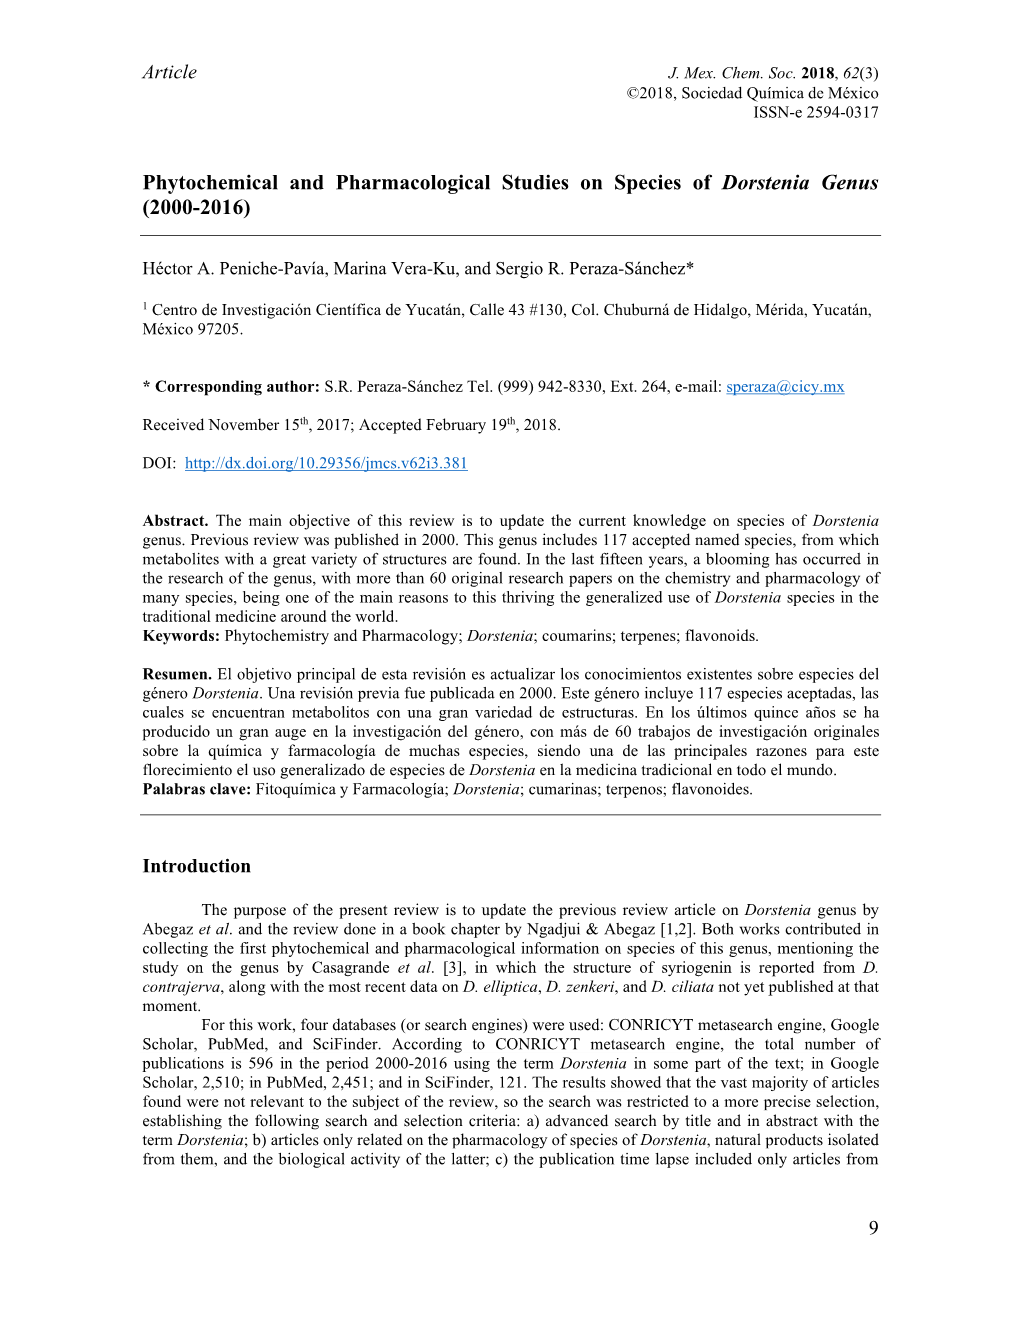 Phytochemical and Pharmacological Studies on Species of Dorstenia Genus (2000-2016)